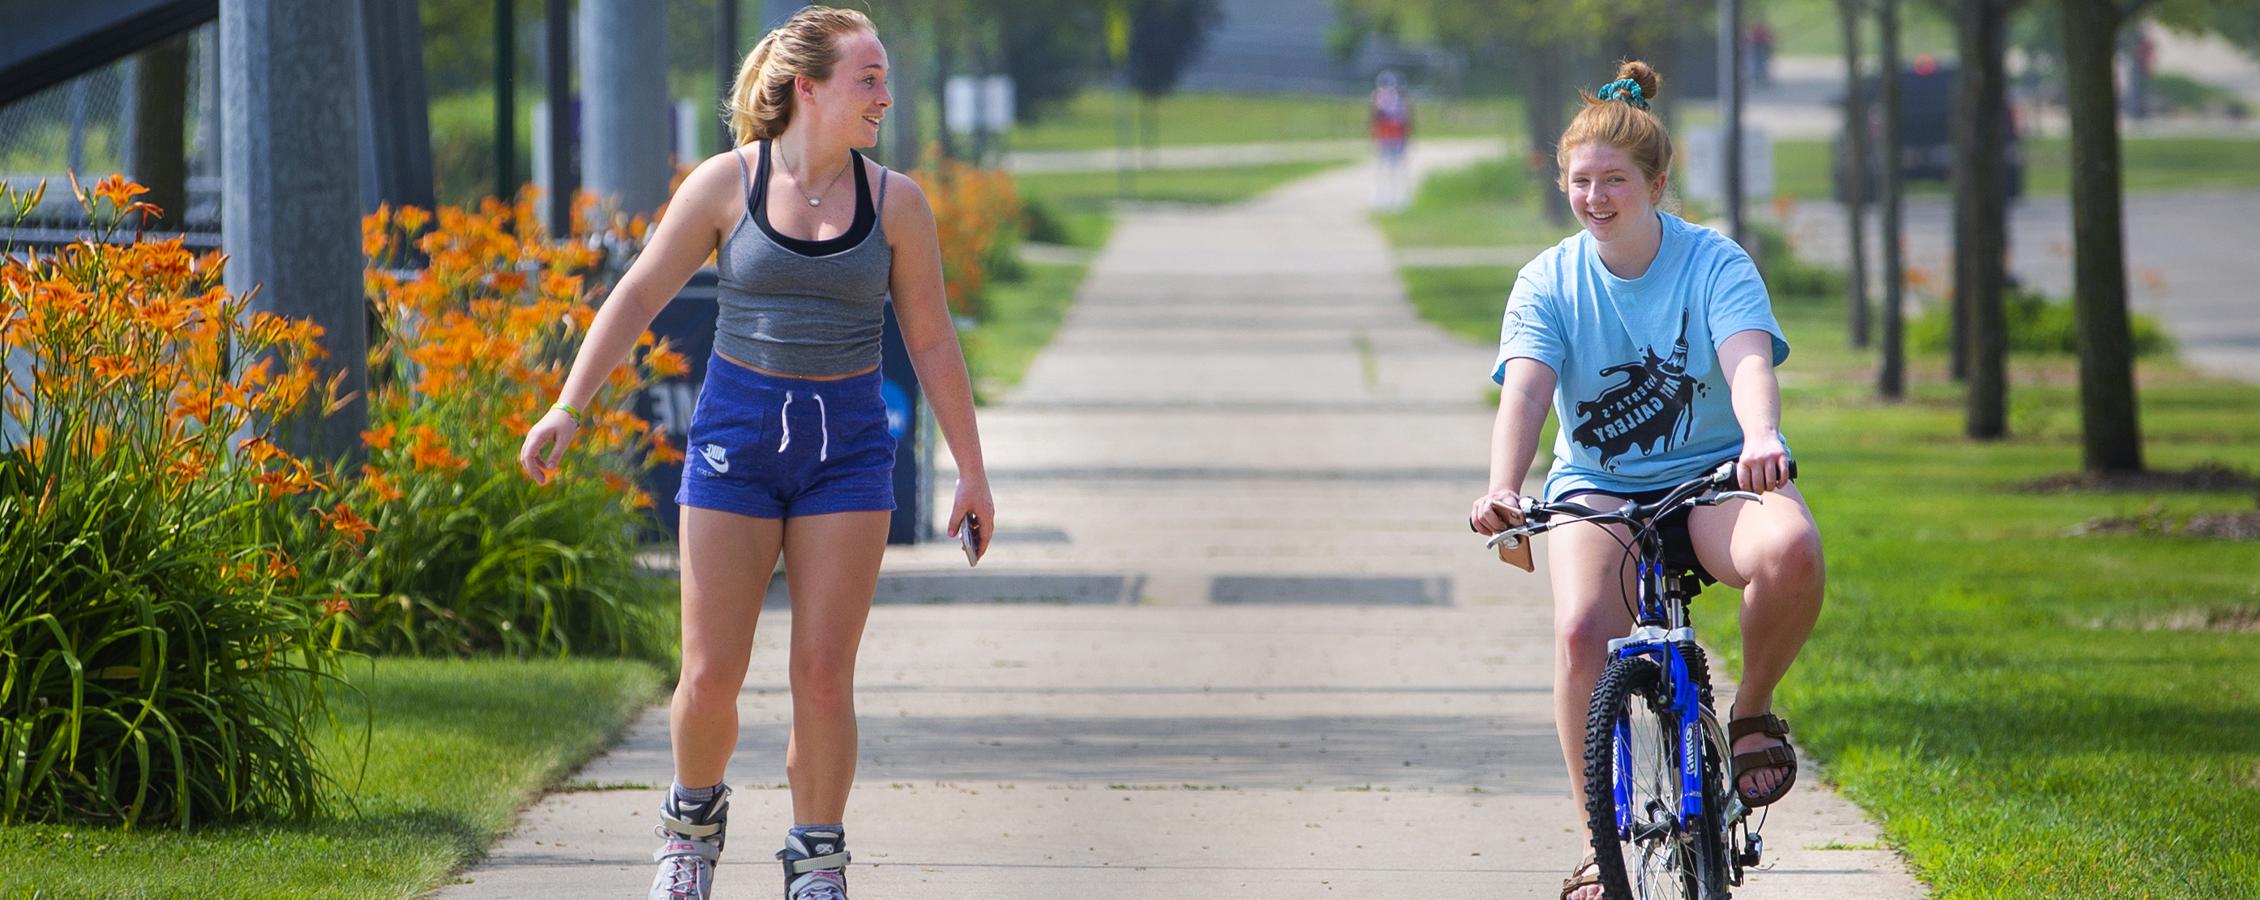 A student rides a bike next to another student rollerblading down a sidewalk.